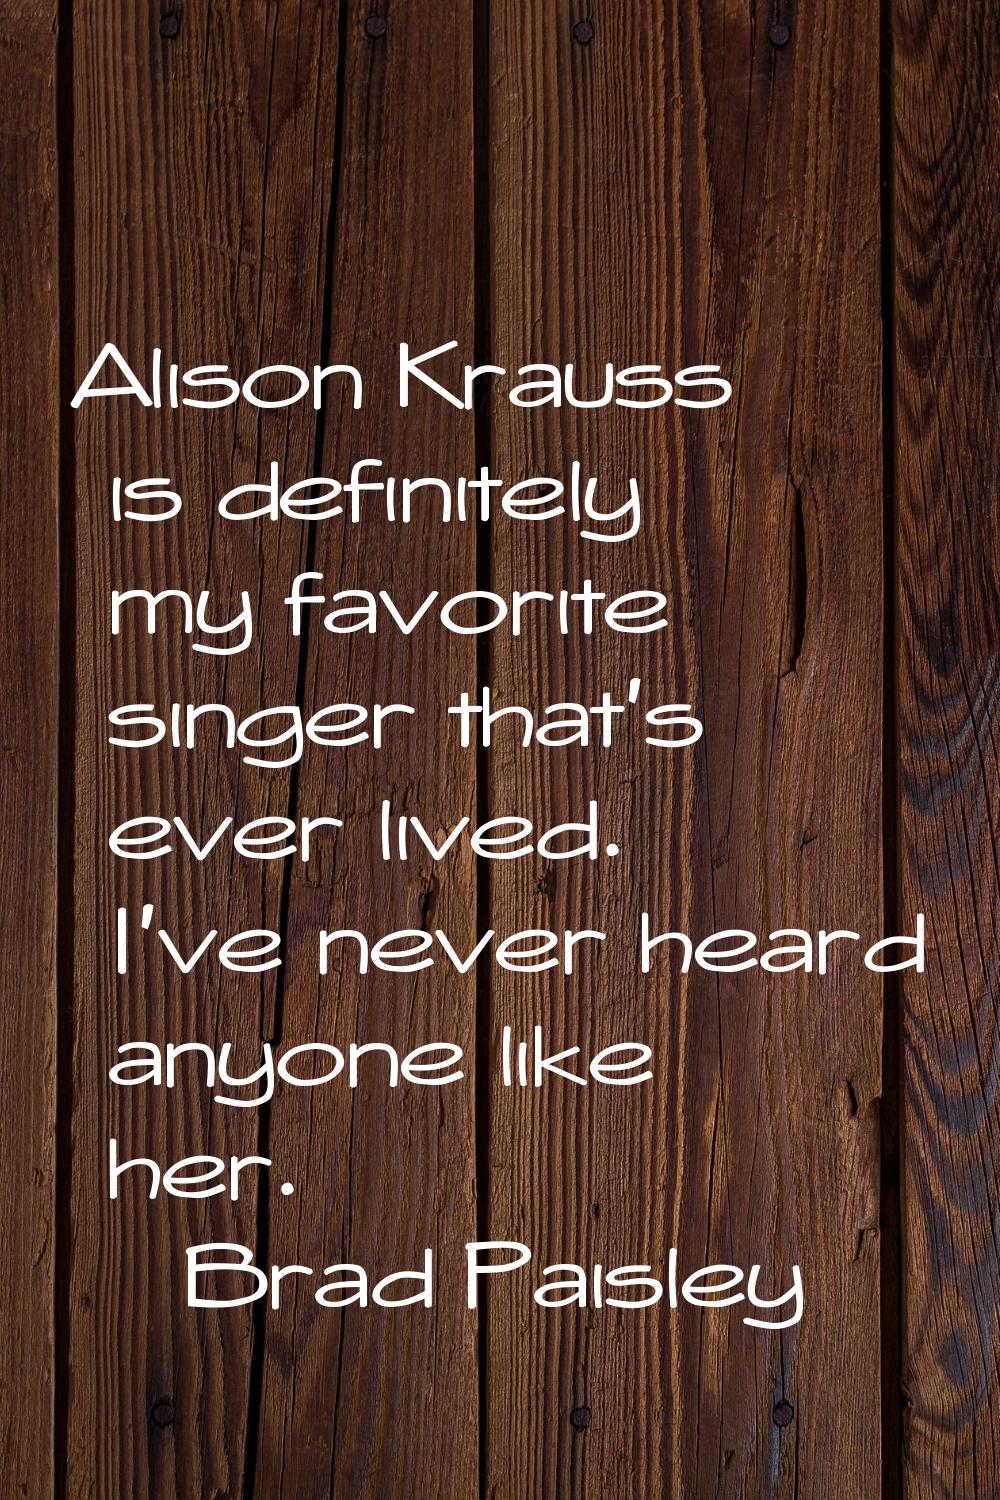 Alison Krauss is definitely my favorite singer that's ever lived. I've never heard anyone like her.